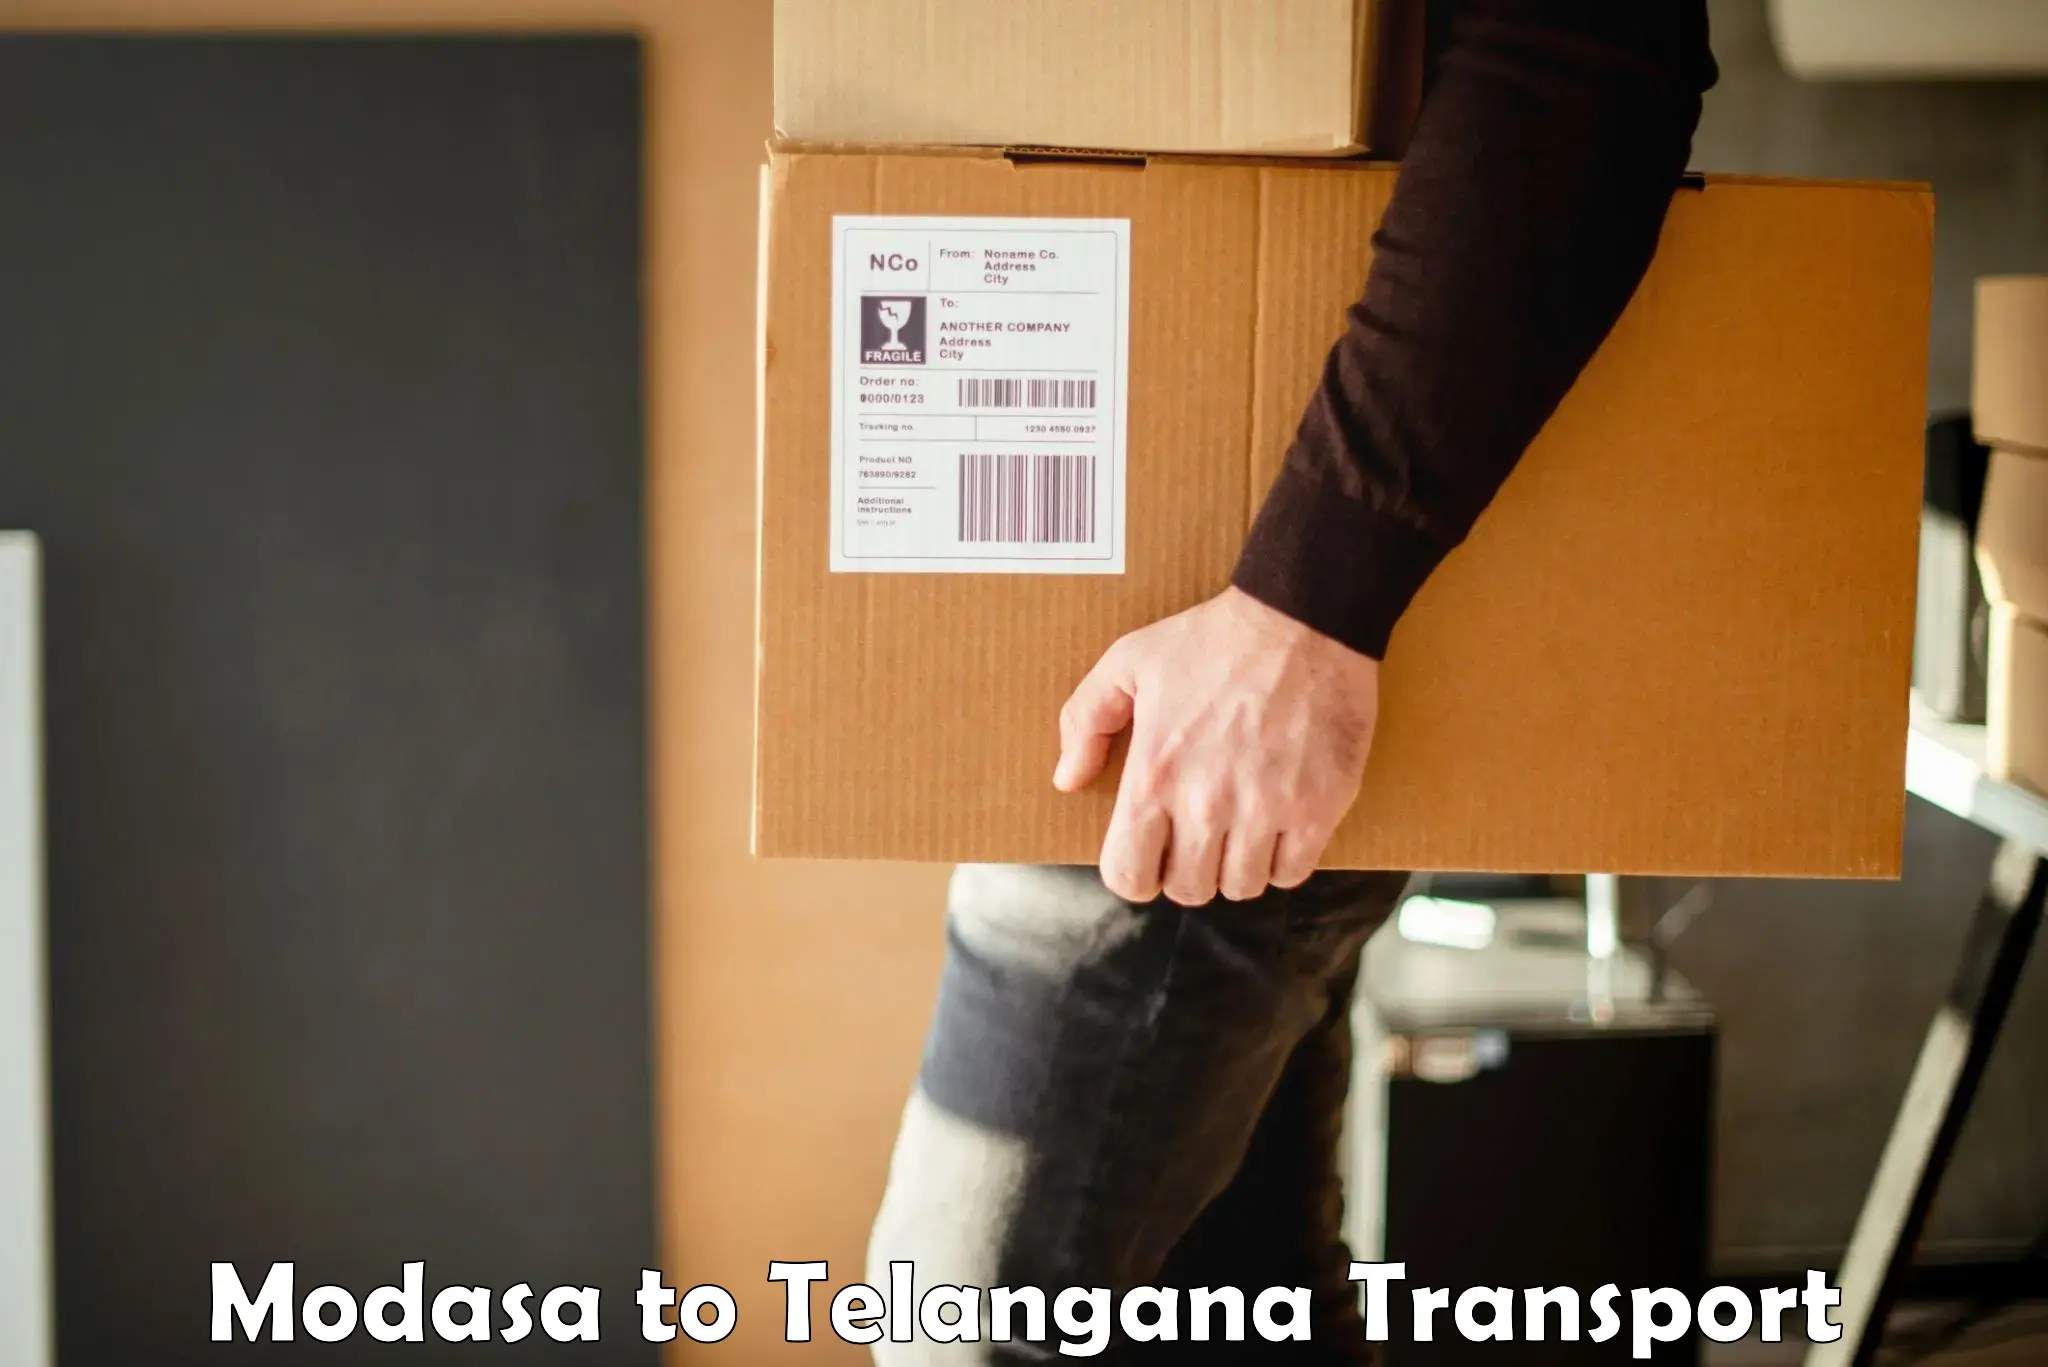 Truck transport companies in India Modasa to International Institute of Information Technology Hyderabad